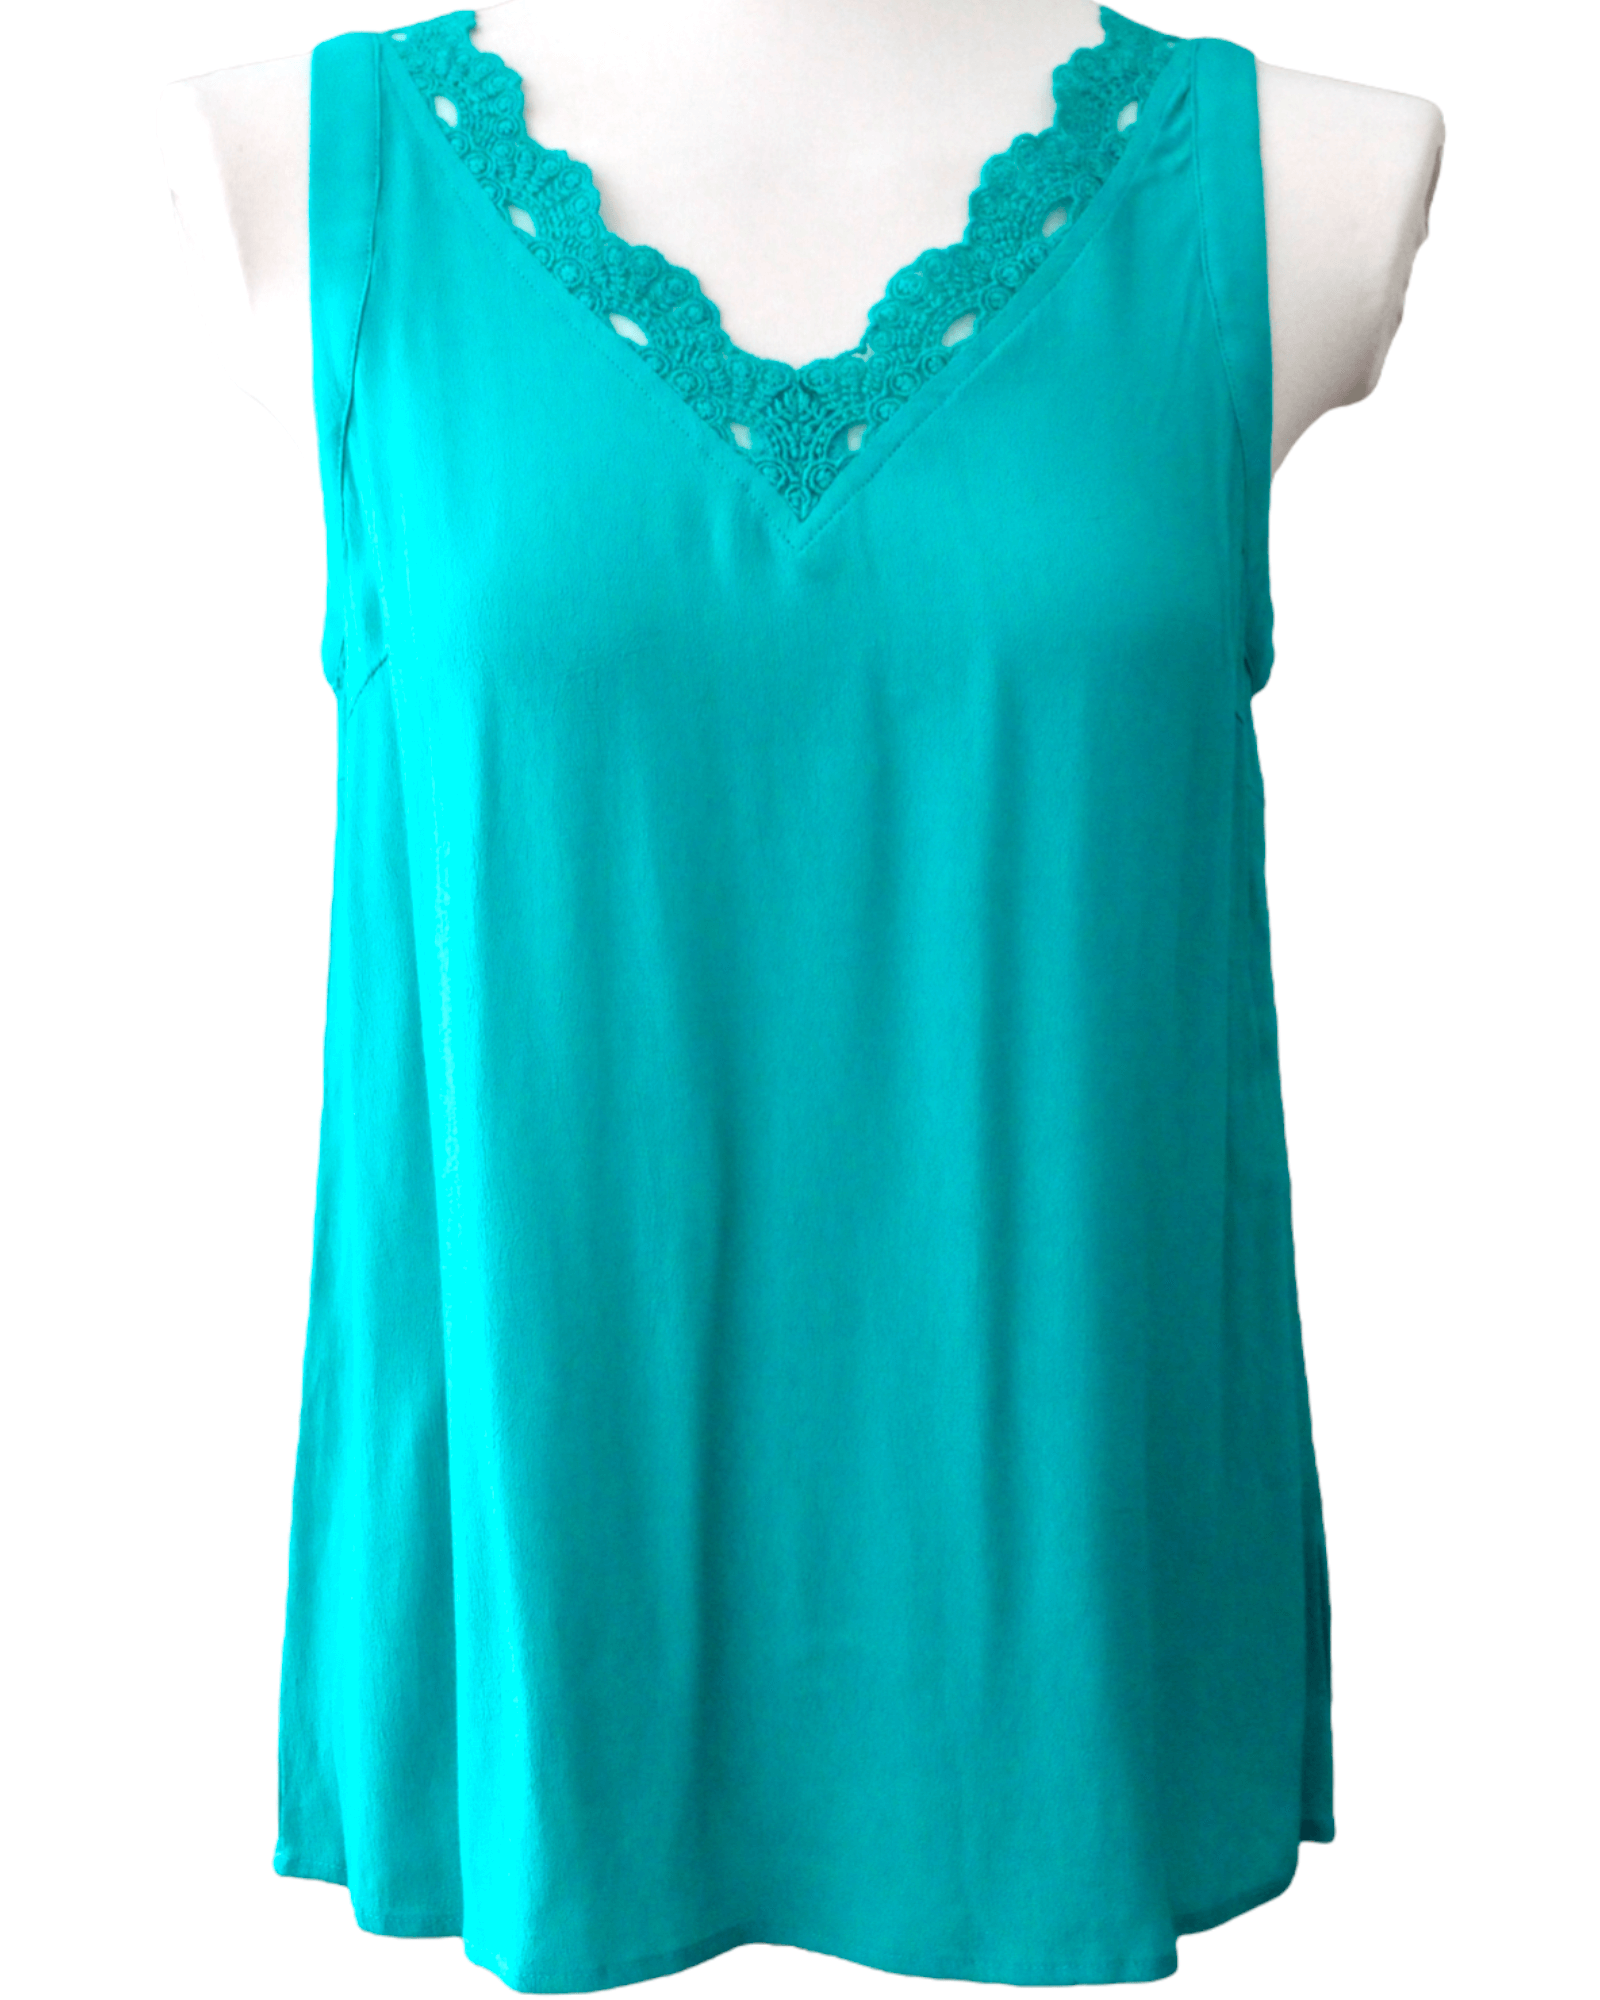 Bright Winter Teal Lace Blouse